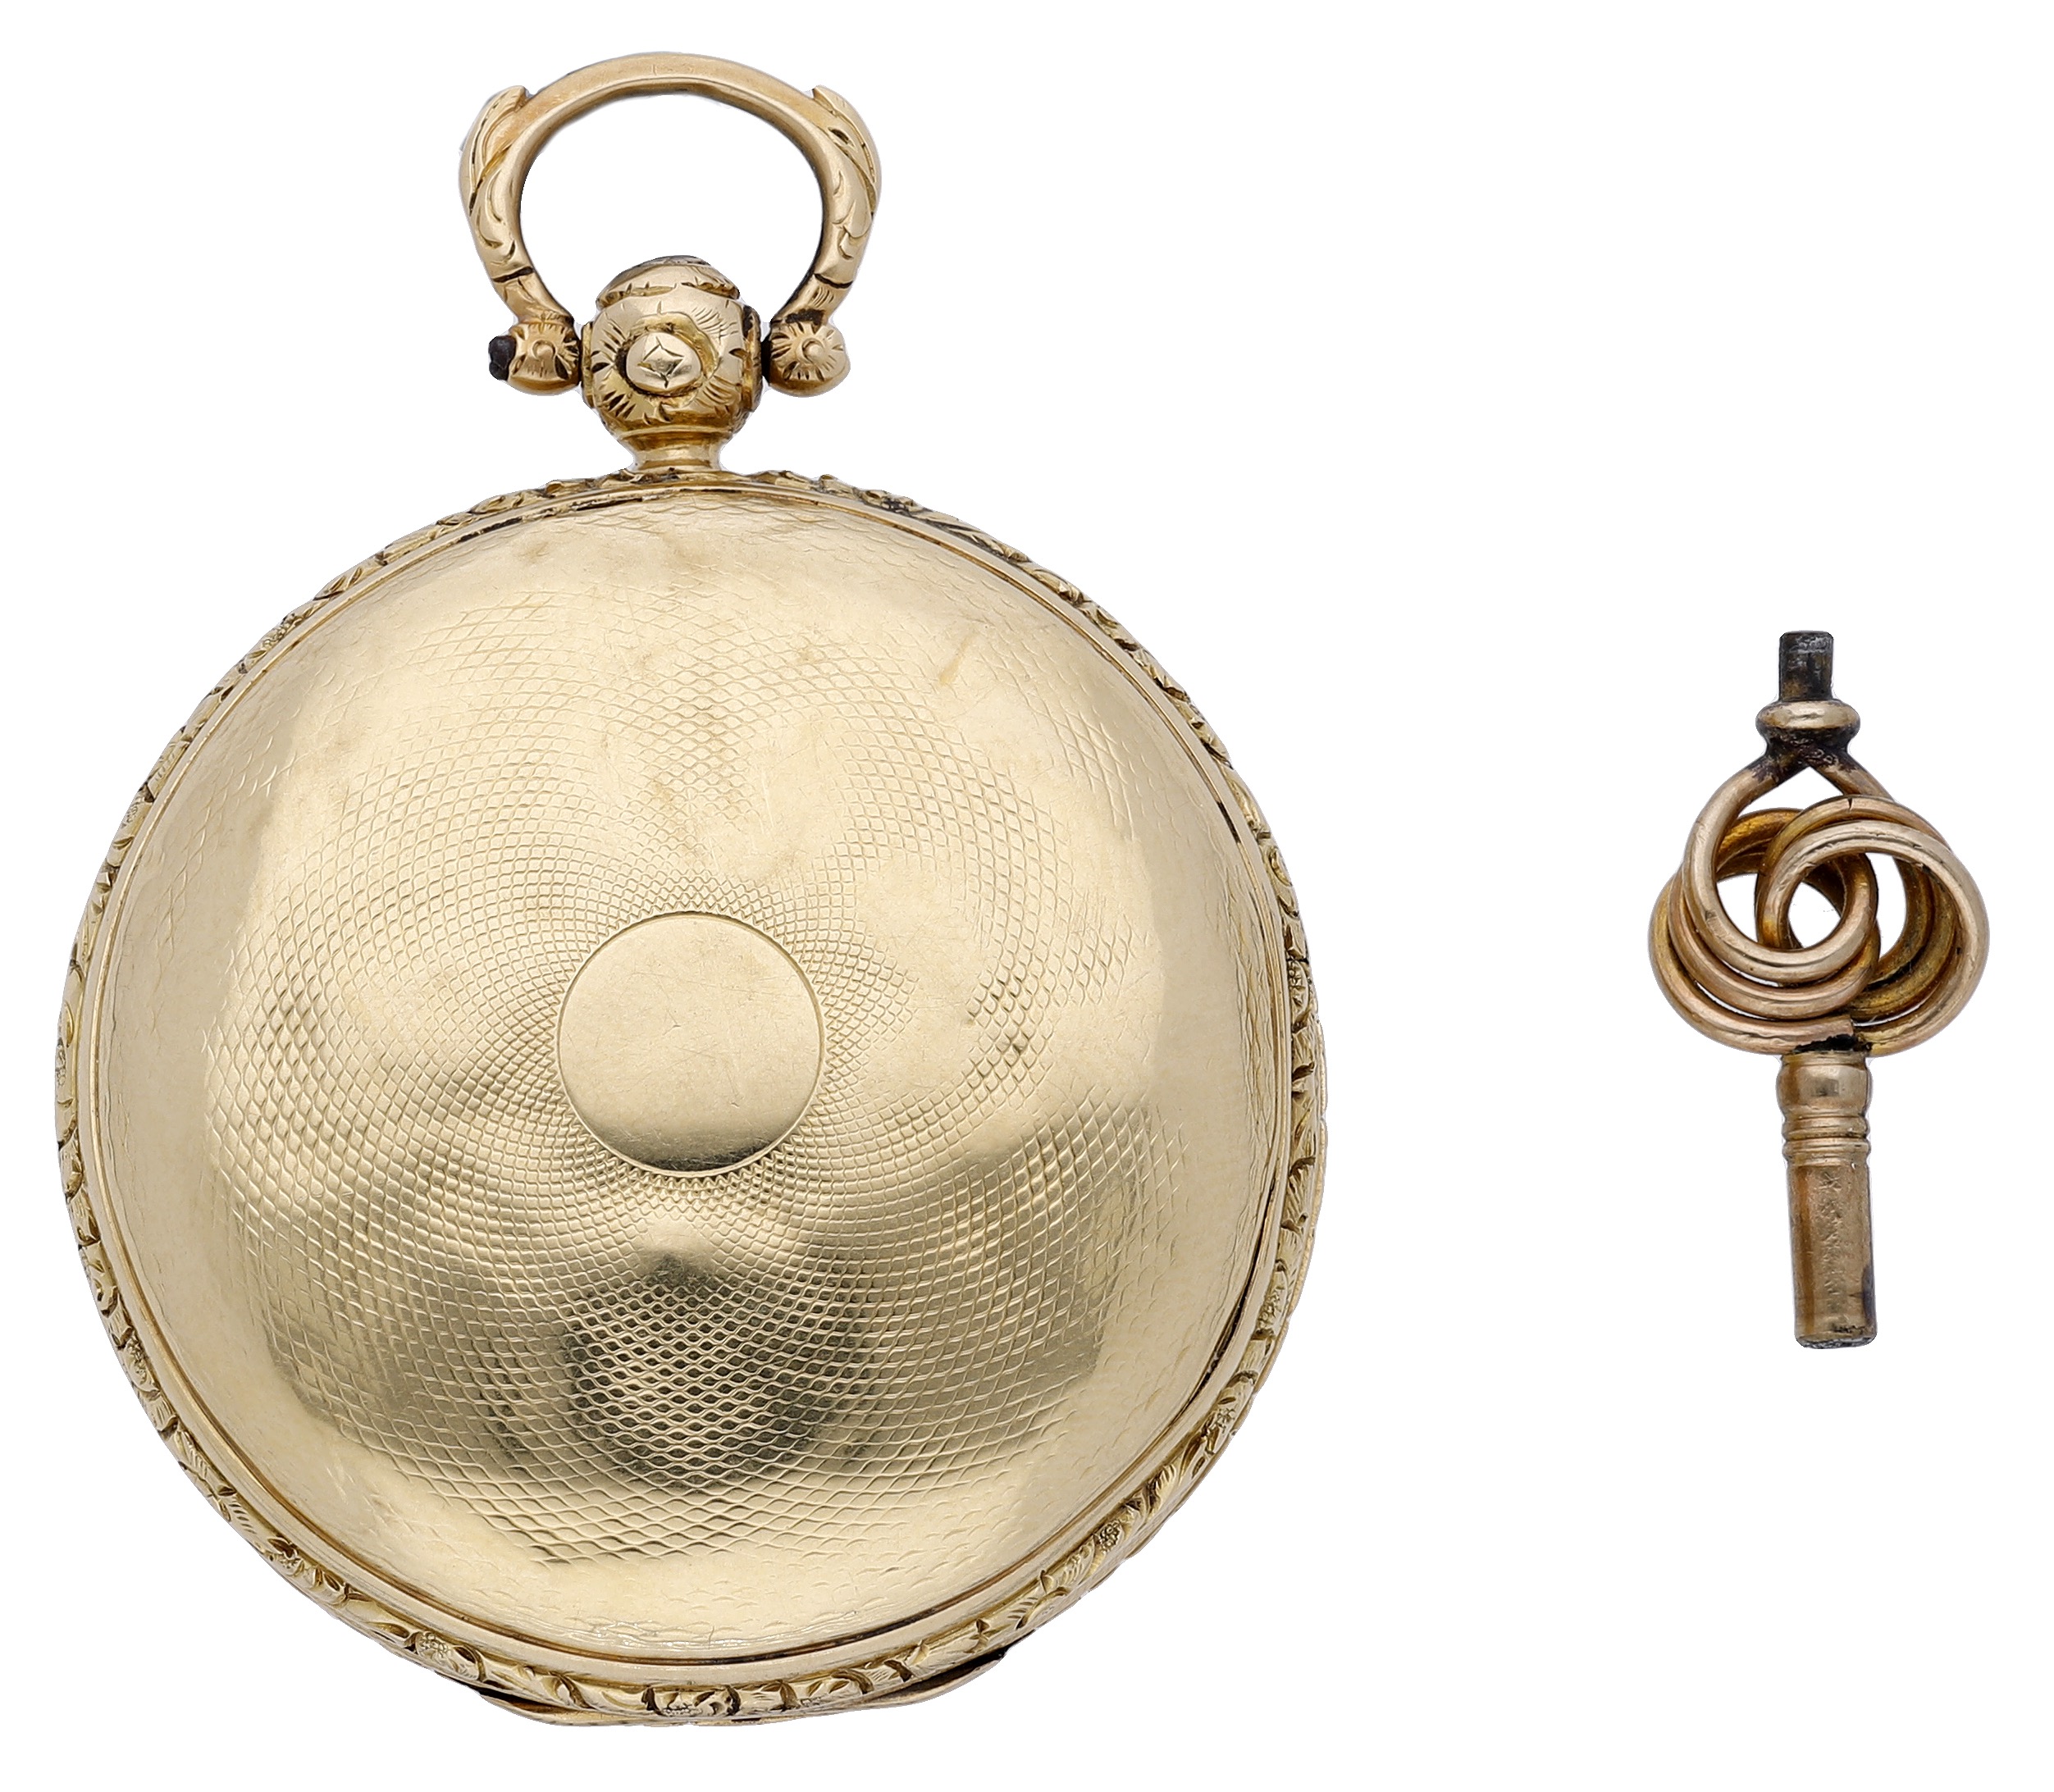 English. A gold consular cased watch, circa 1830. Movement: gilt full plate, verge escapement.... - Image 2 of 3